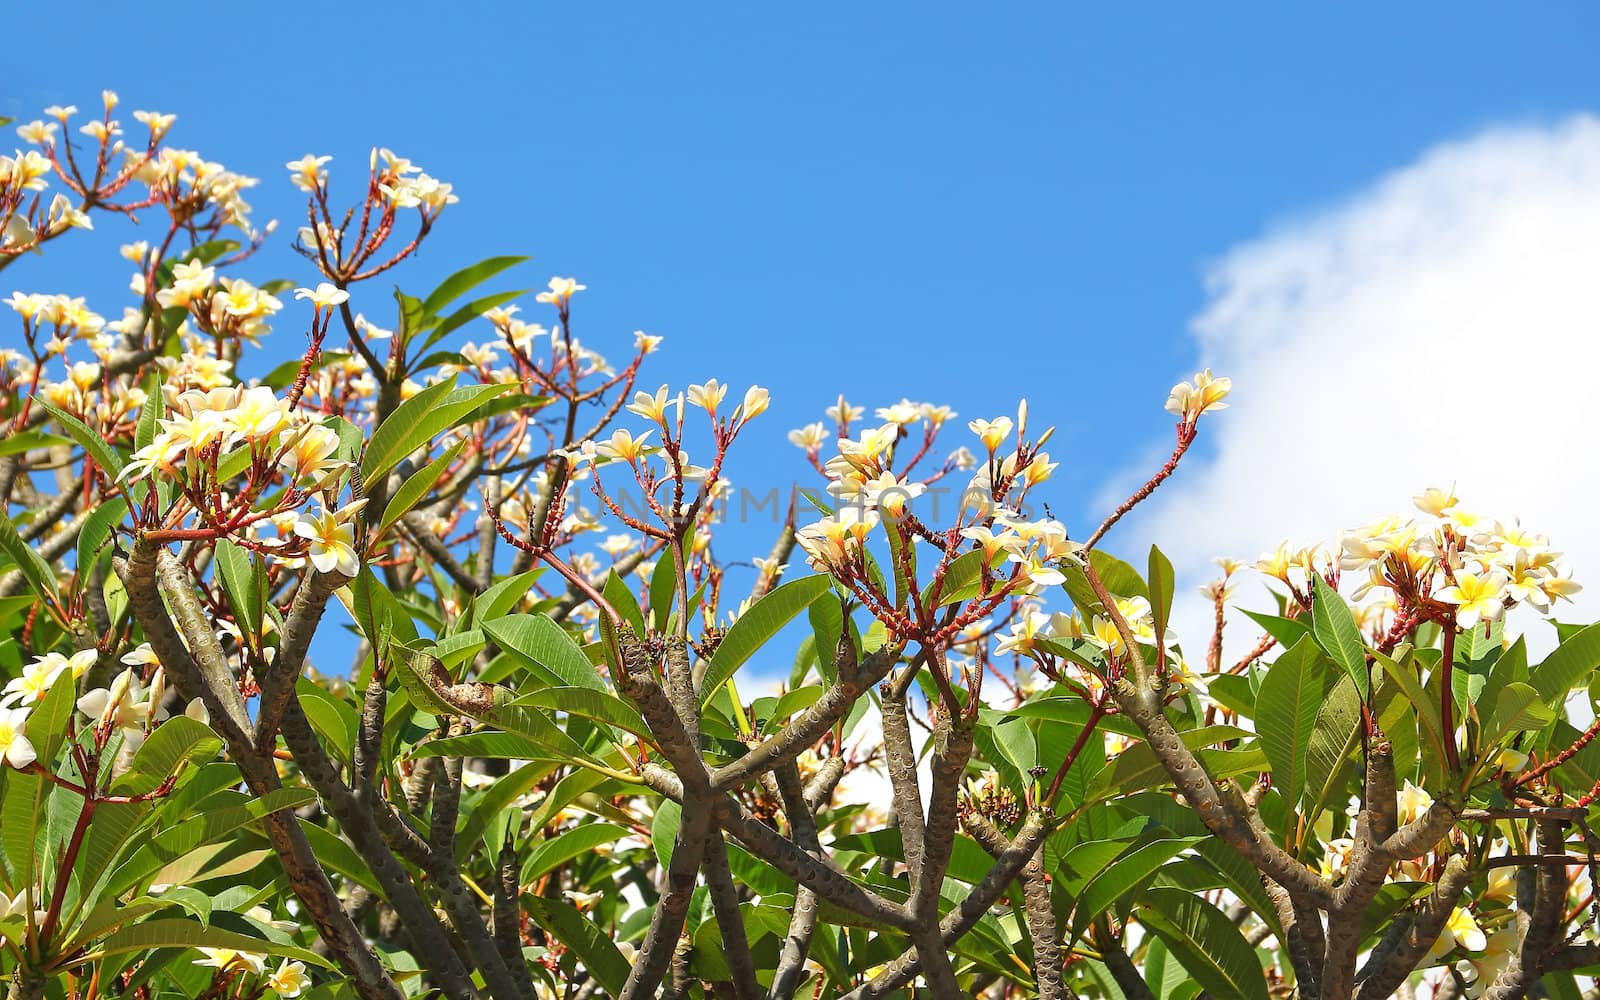 Group of frangipani (plumeria) flower blooming against the blue sky